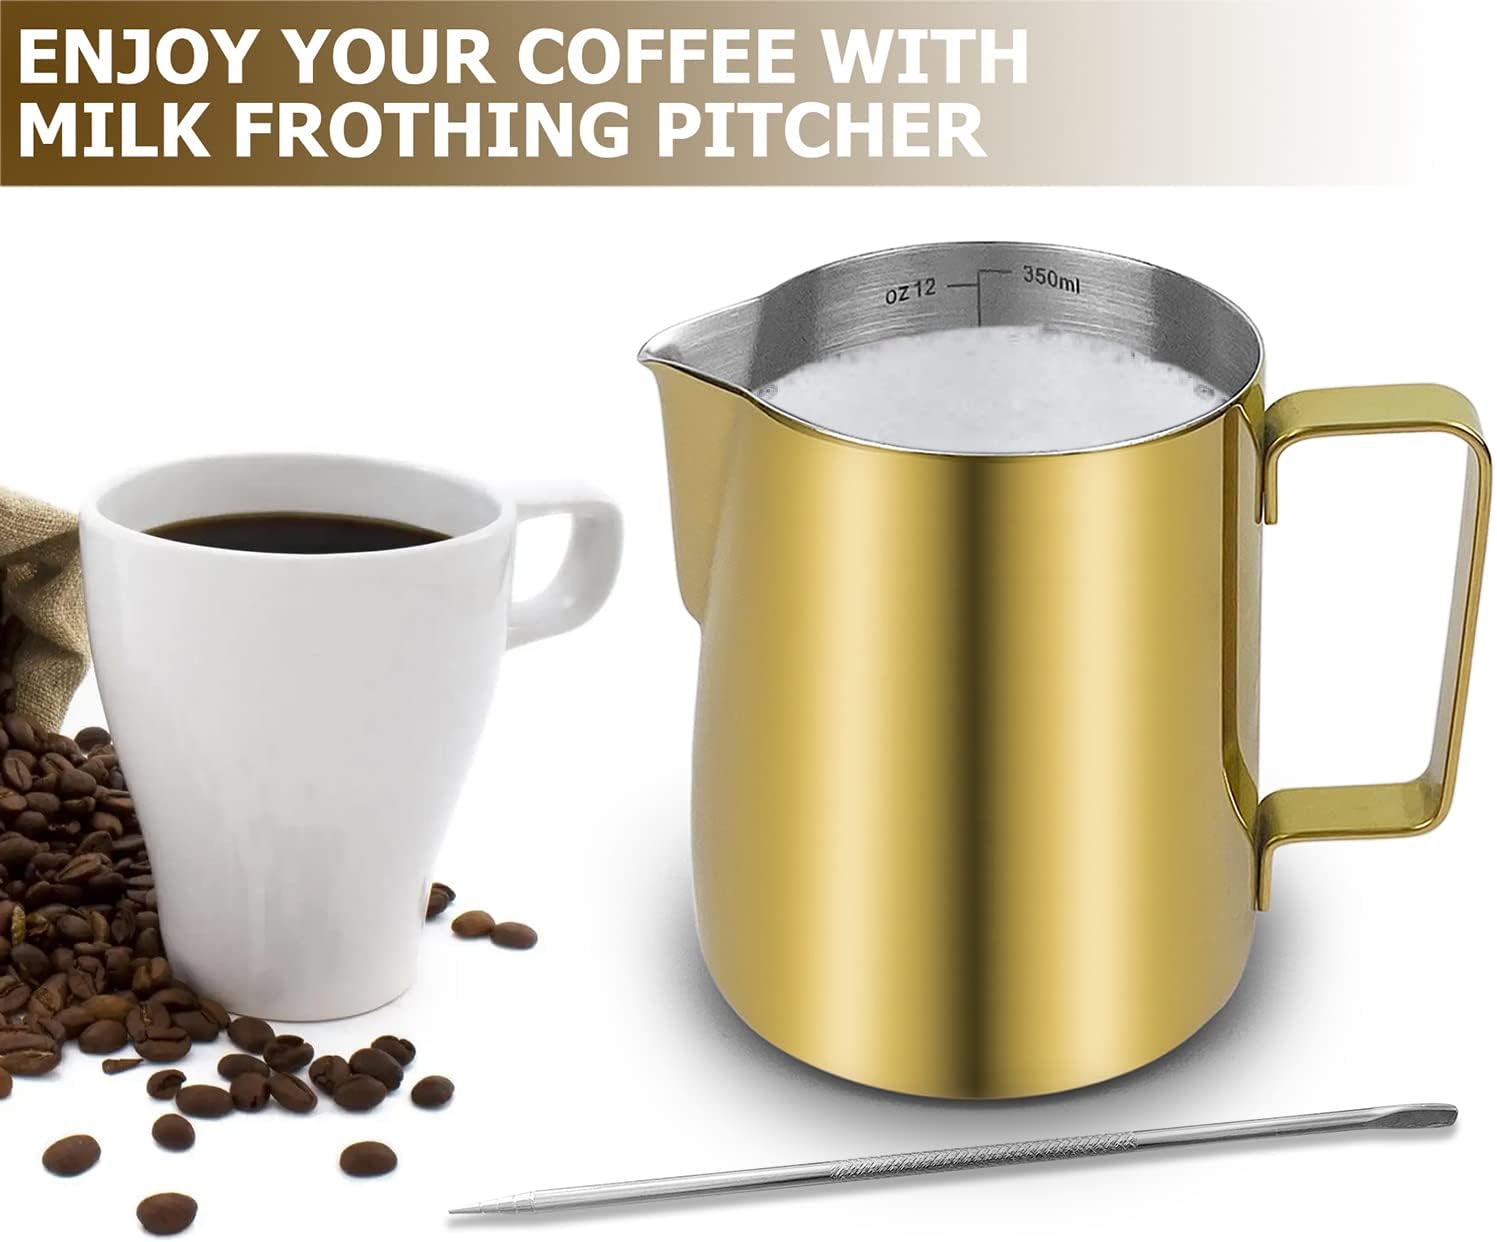 CAMKYDE Stainless Steel Milk Frothing Pitcher 12 oz, Espresso Steaming Pitcher with Decorating Pen for Espresso Machines, Cappuccino, Latte Art